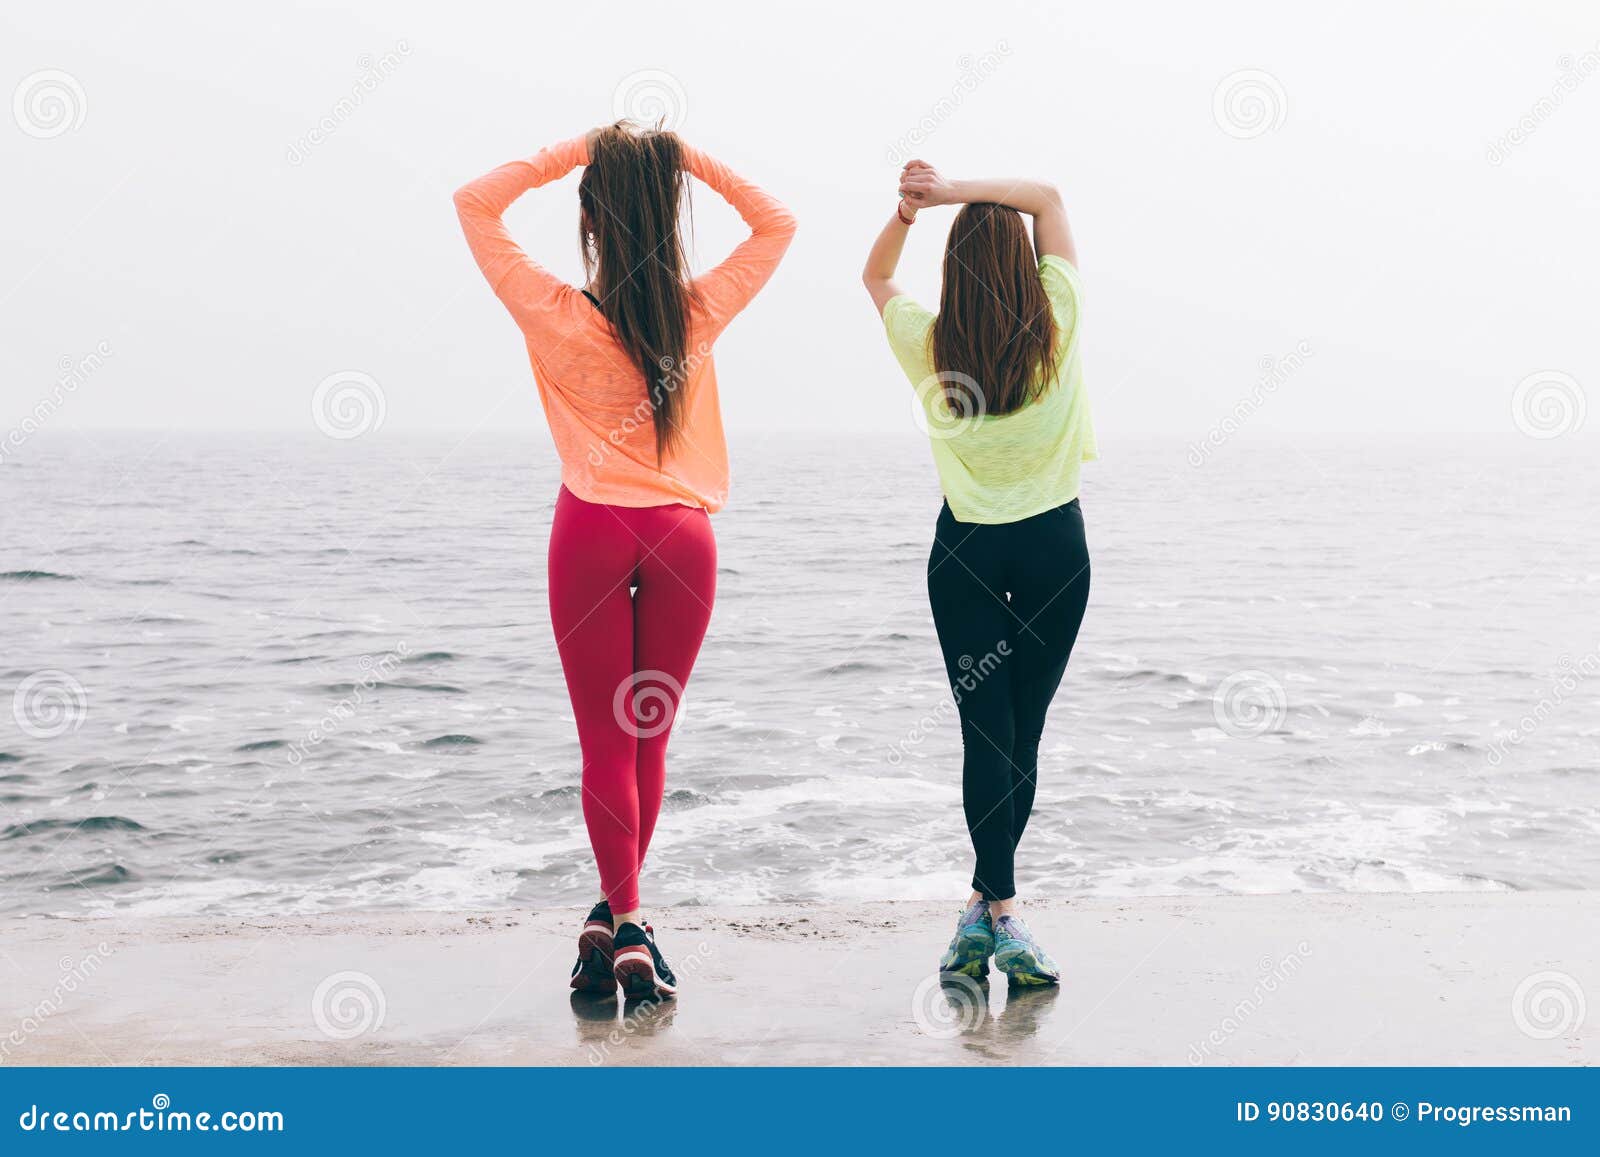 Young candid girls at beach